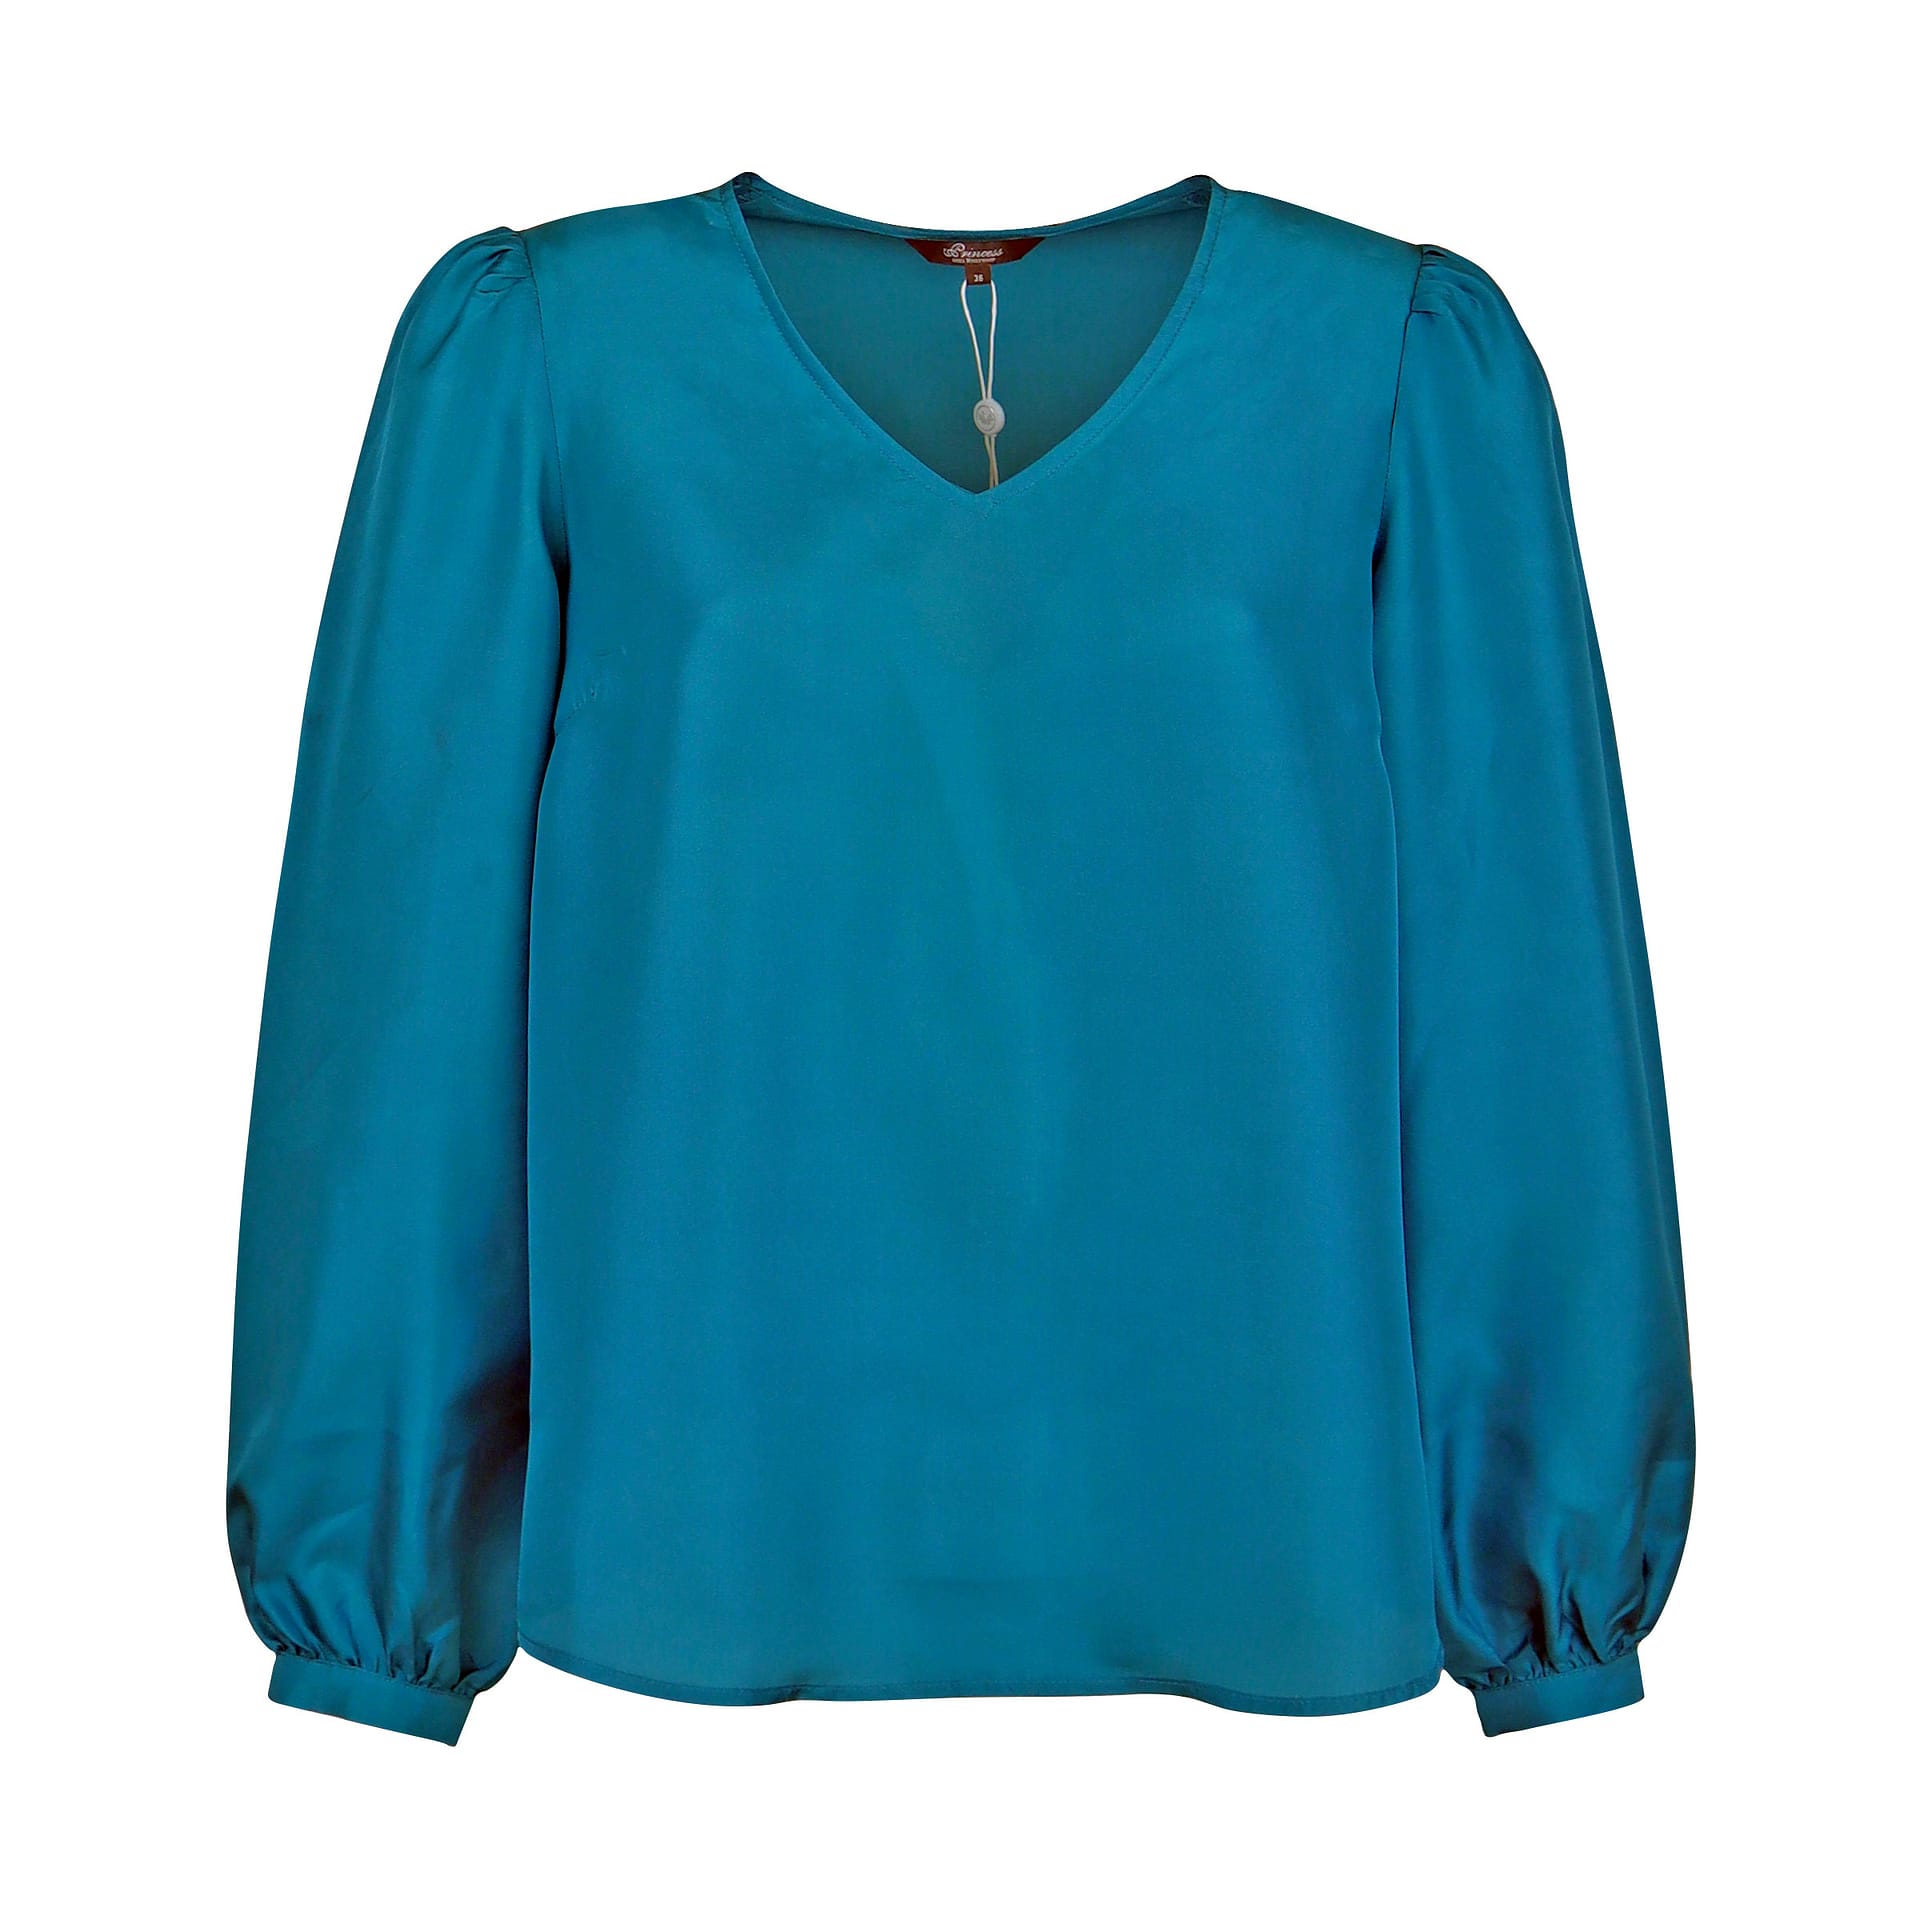 Analytisch Donker worden verhouding Princess goes Hollywood • zijden blouse in petrol • shop BollyWolly